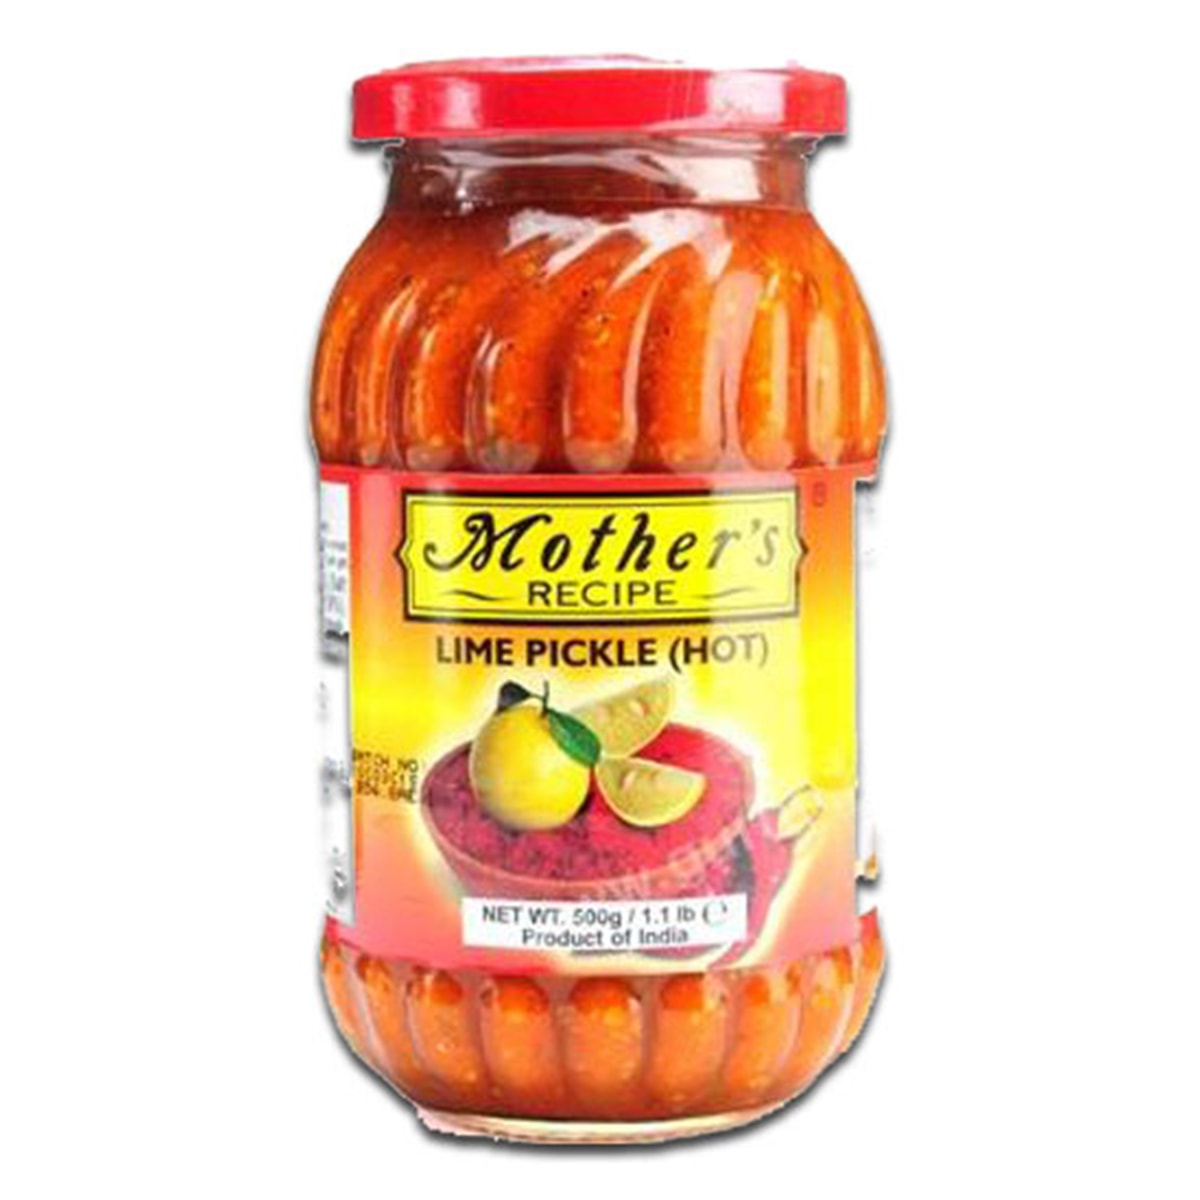 Buy Mothers Recipe Lime Pickle Hot - 500 gm